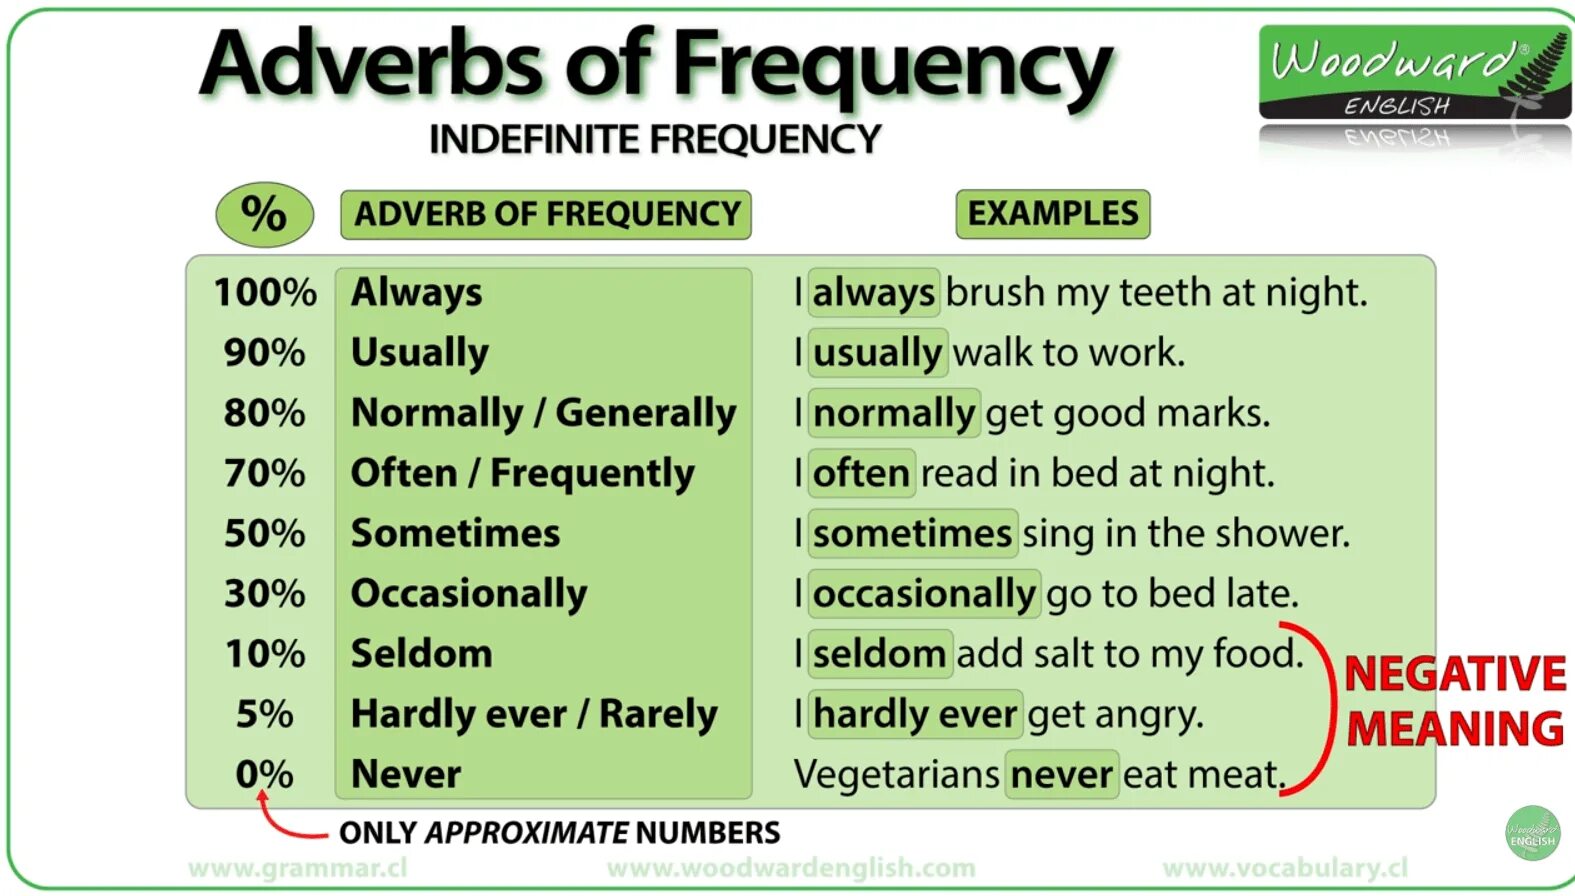 Adverbs of Frequency. Adverbs of Frequency in English. Adverbs and expressions of Frequency правило. Frequency adverbs грамматика. Frequency words